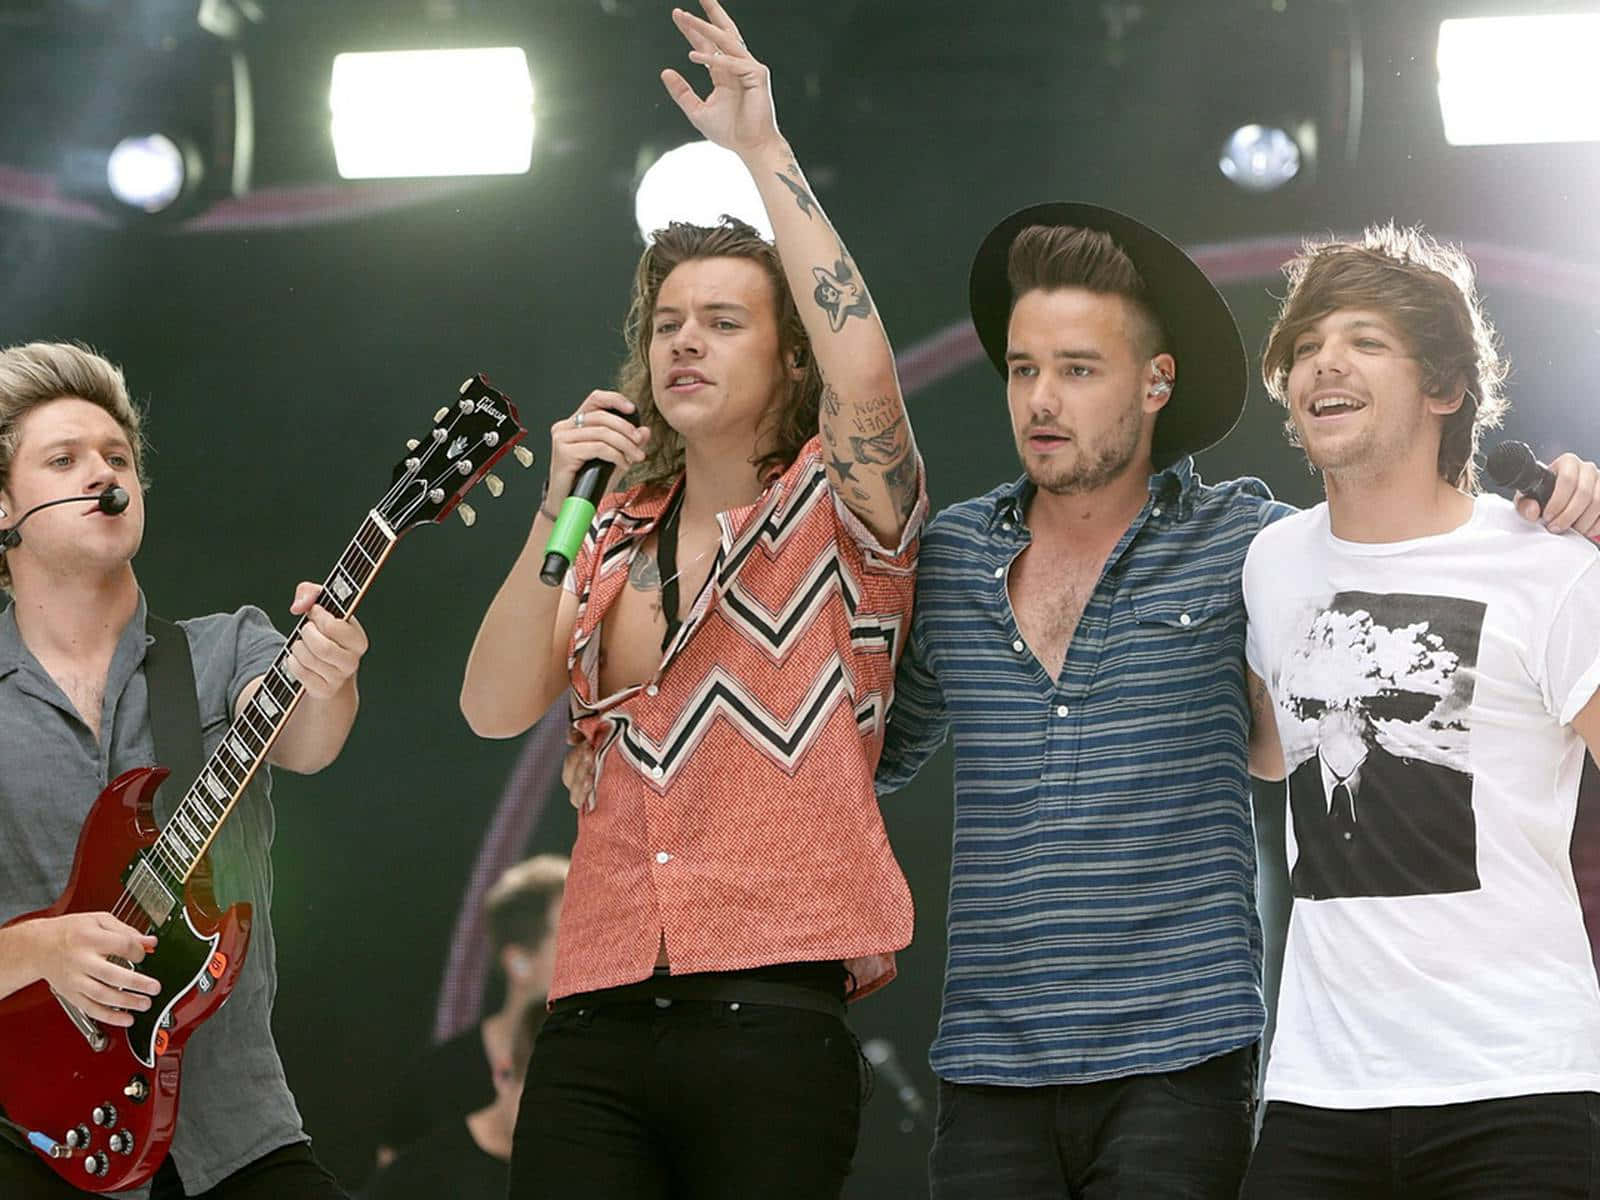 __ "1D Forever!" The iconic boy band One Direction on stage, performing for devoted fans.